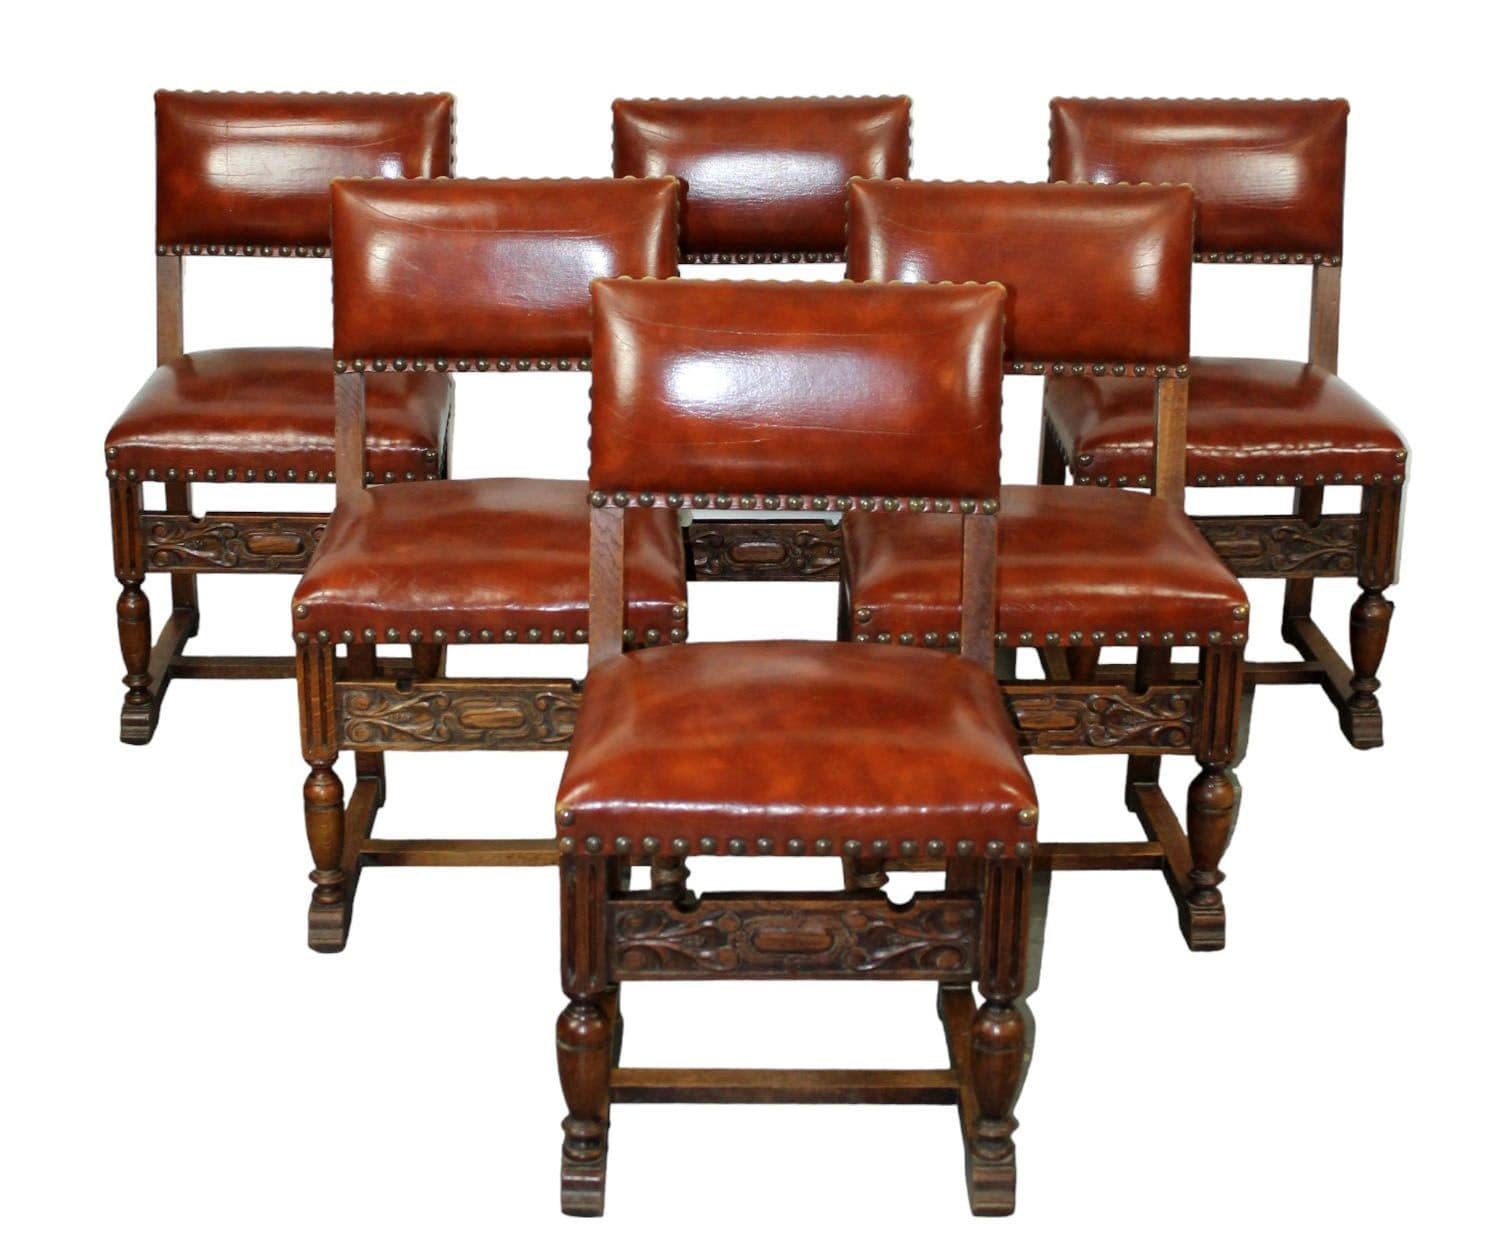 6 French carved oak and leather dining chairs